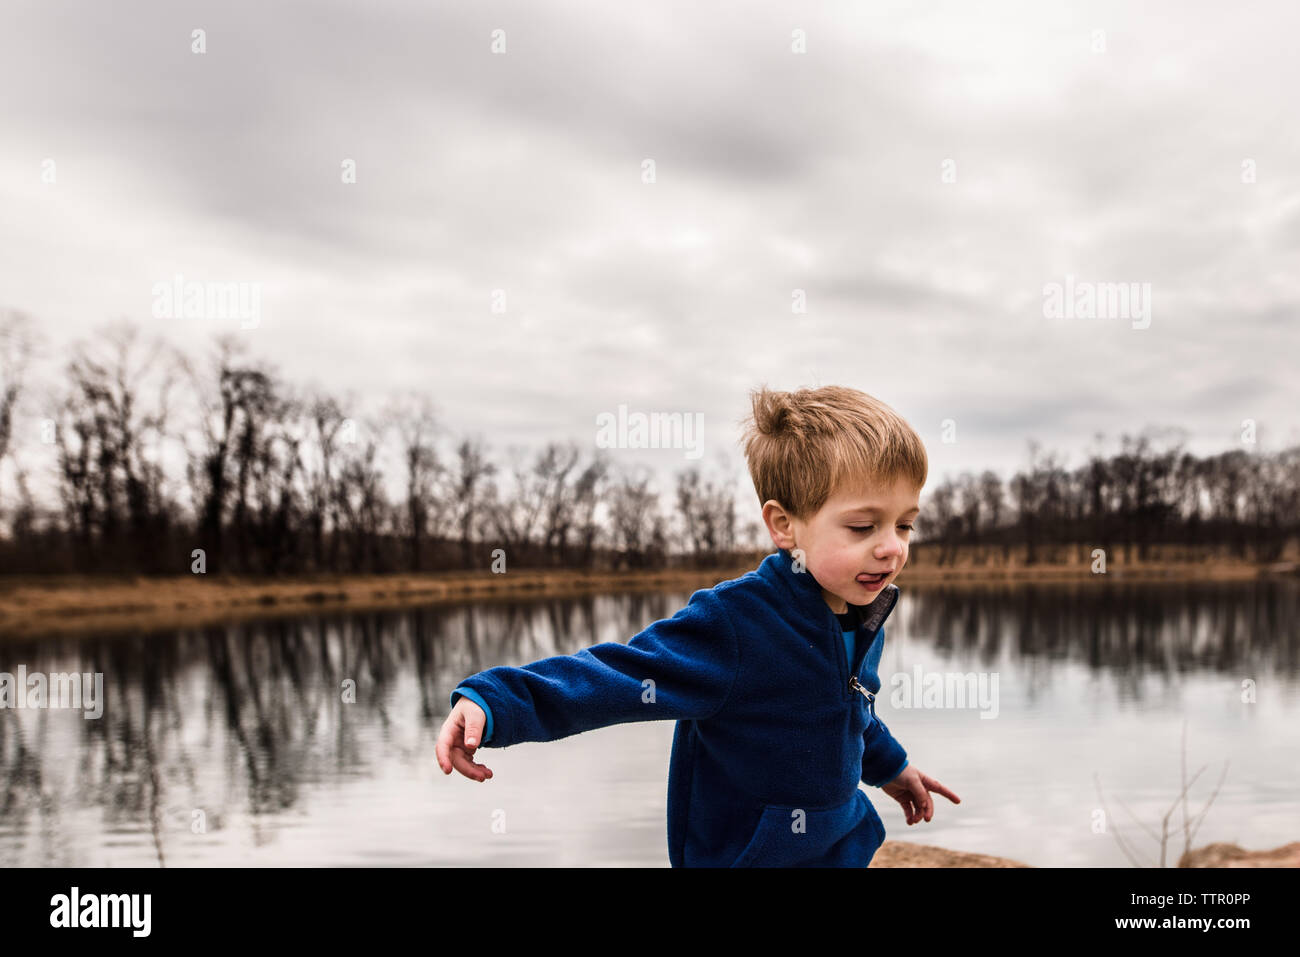 Young boy being silly at the edge of a lake on a cloudy day Stock Photo